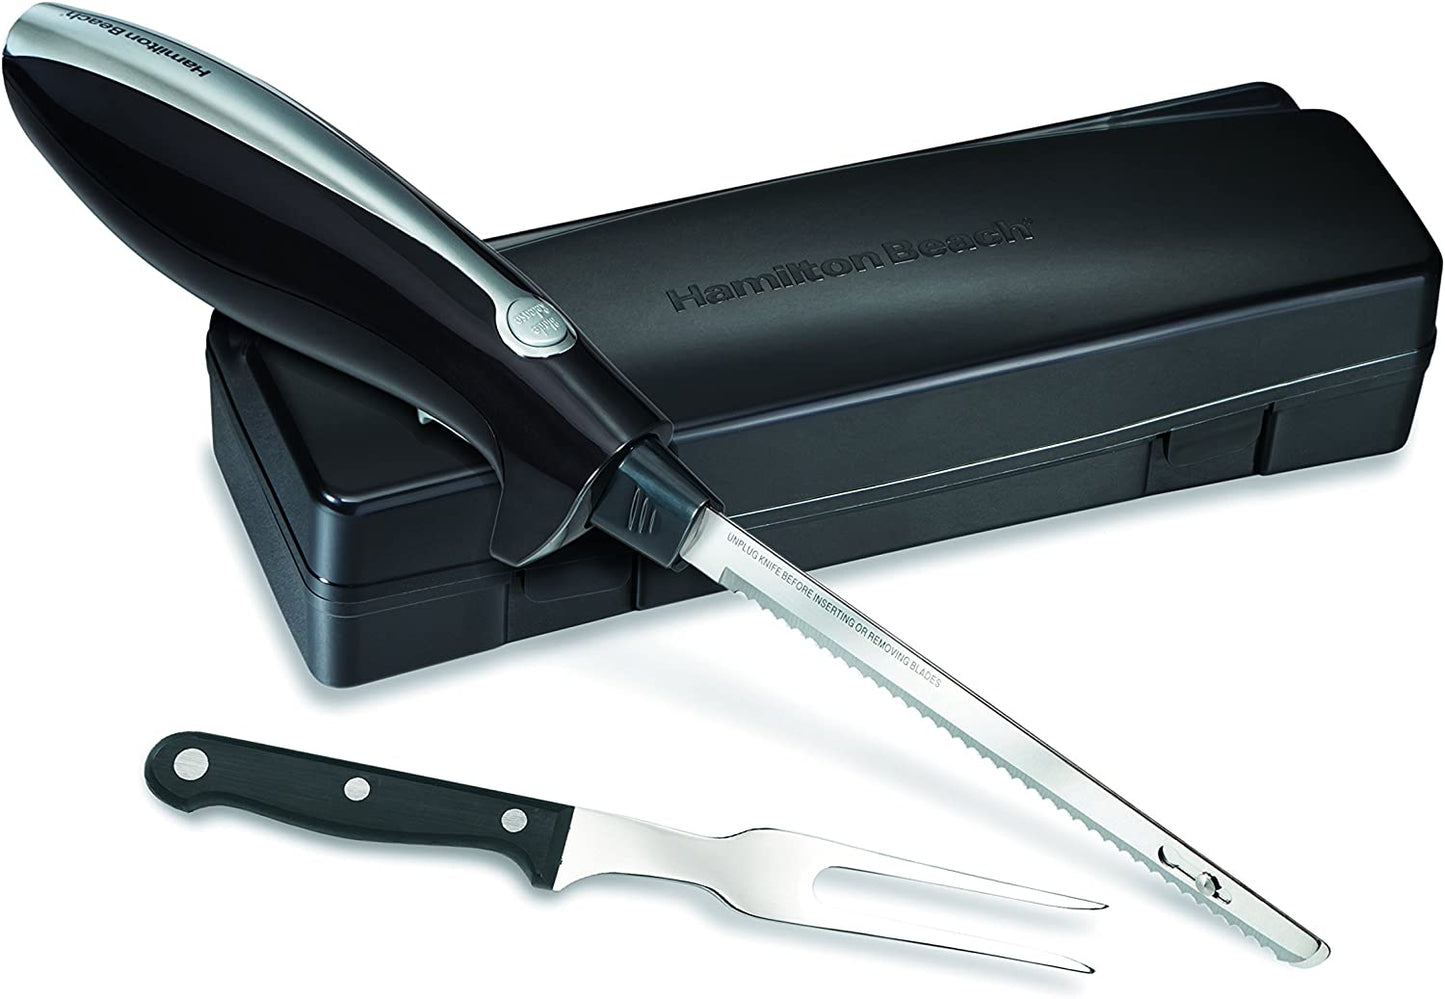 Hamilton Beach Set Electric Carving Knife for Meats, Poultry, Bread, Crafting Foam and More, Storage Case and Serving Fork Included